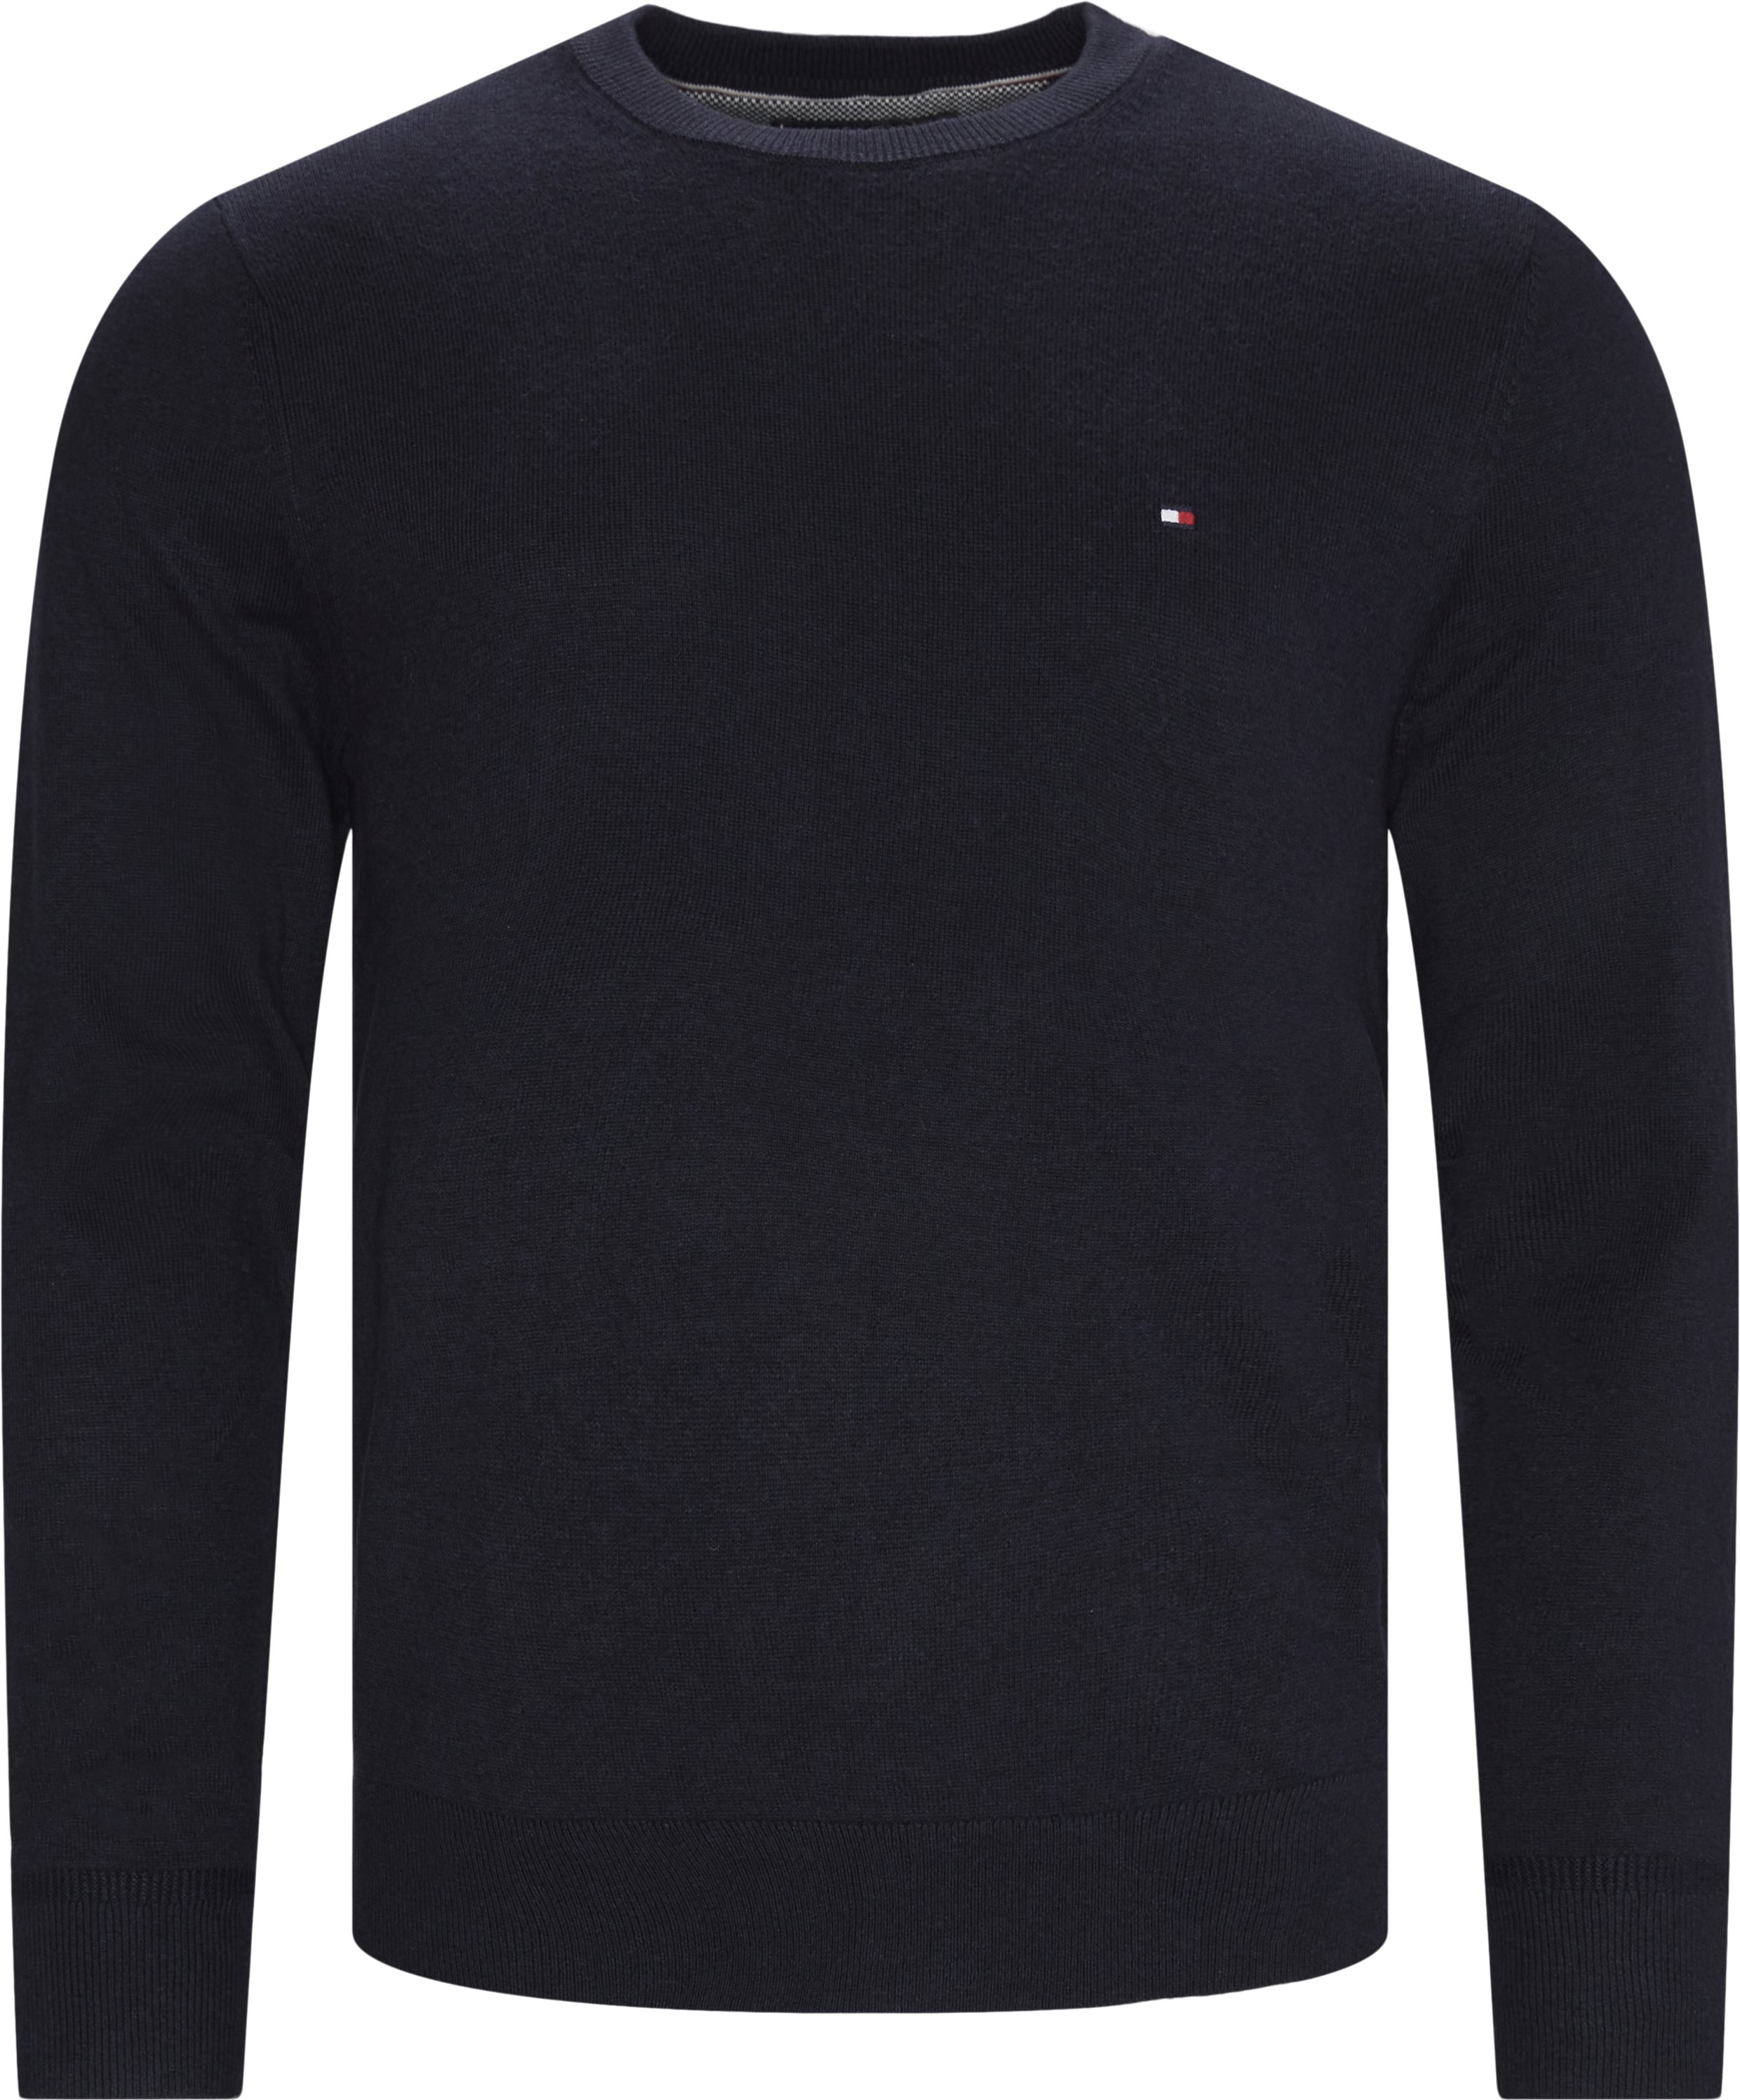 Knitwear CASHMERE EUR Hilfiger from Tommy NAVY 11674 COTTON PIMA 60